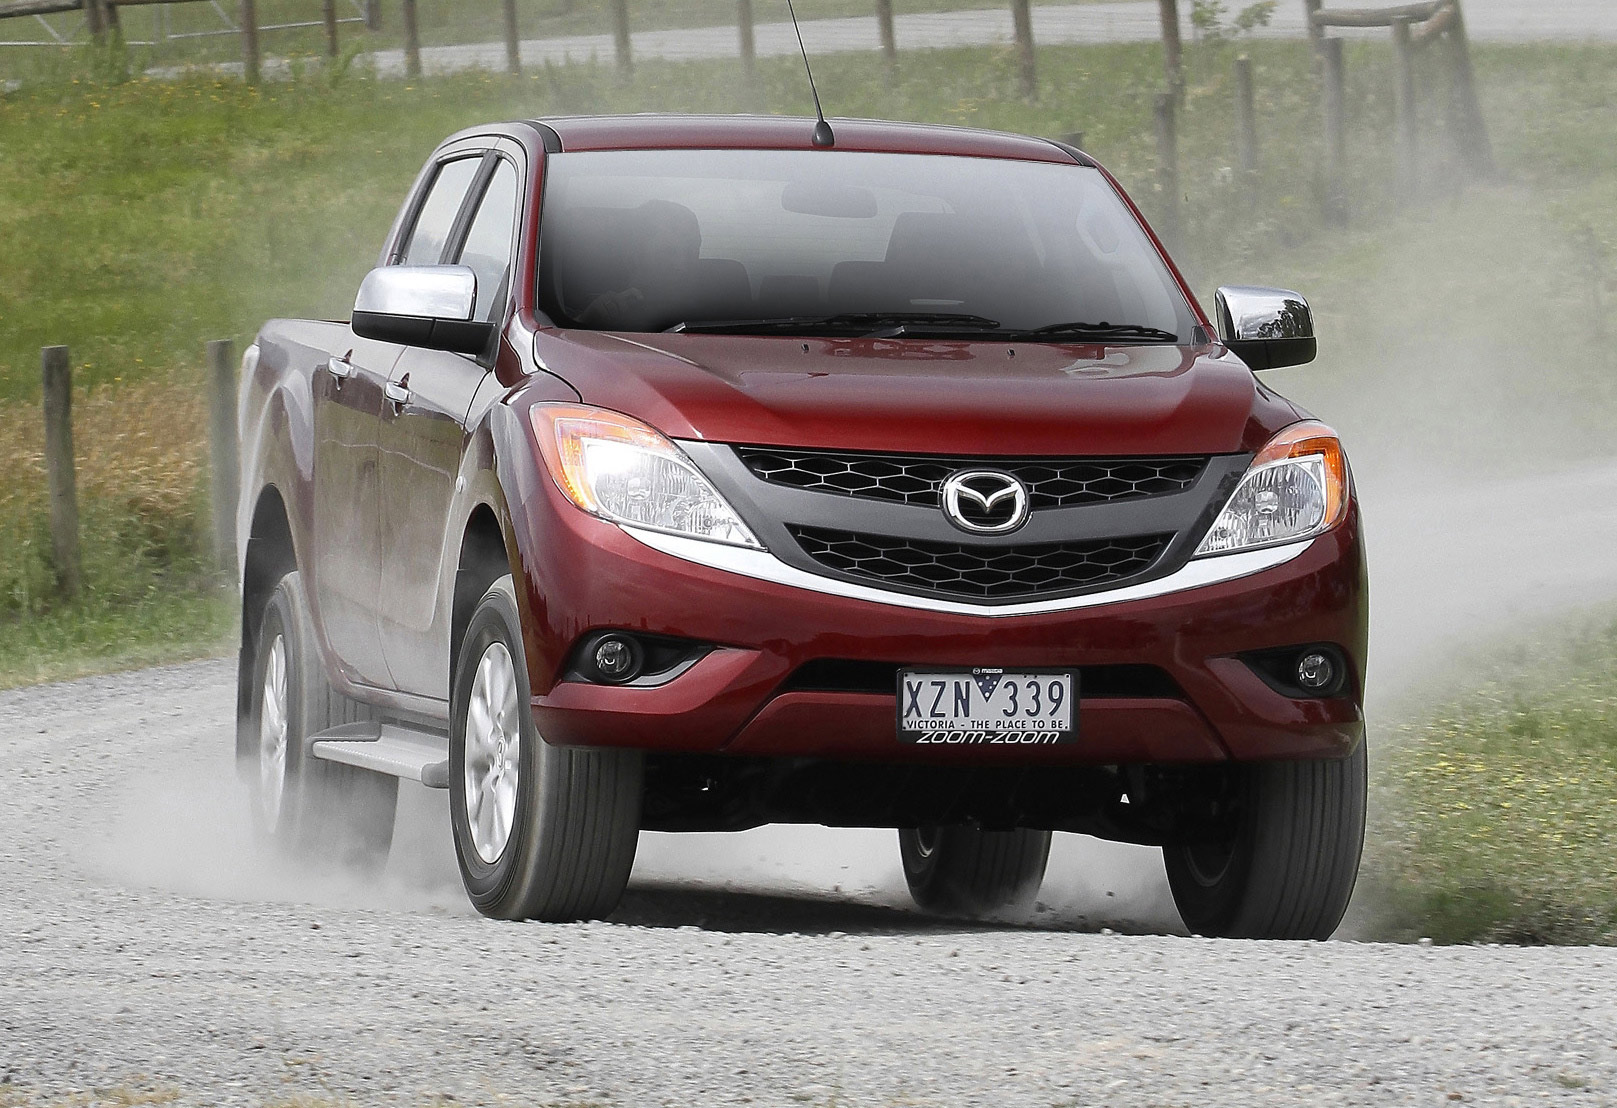 2012 Mazda BT-50 Getting Powerful New 3.2 And 2.2 Diesel Engines ...